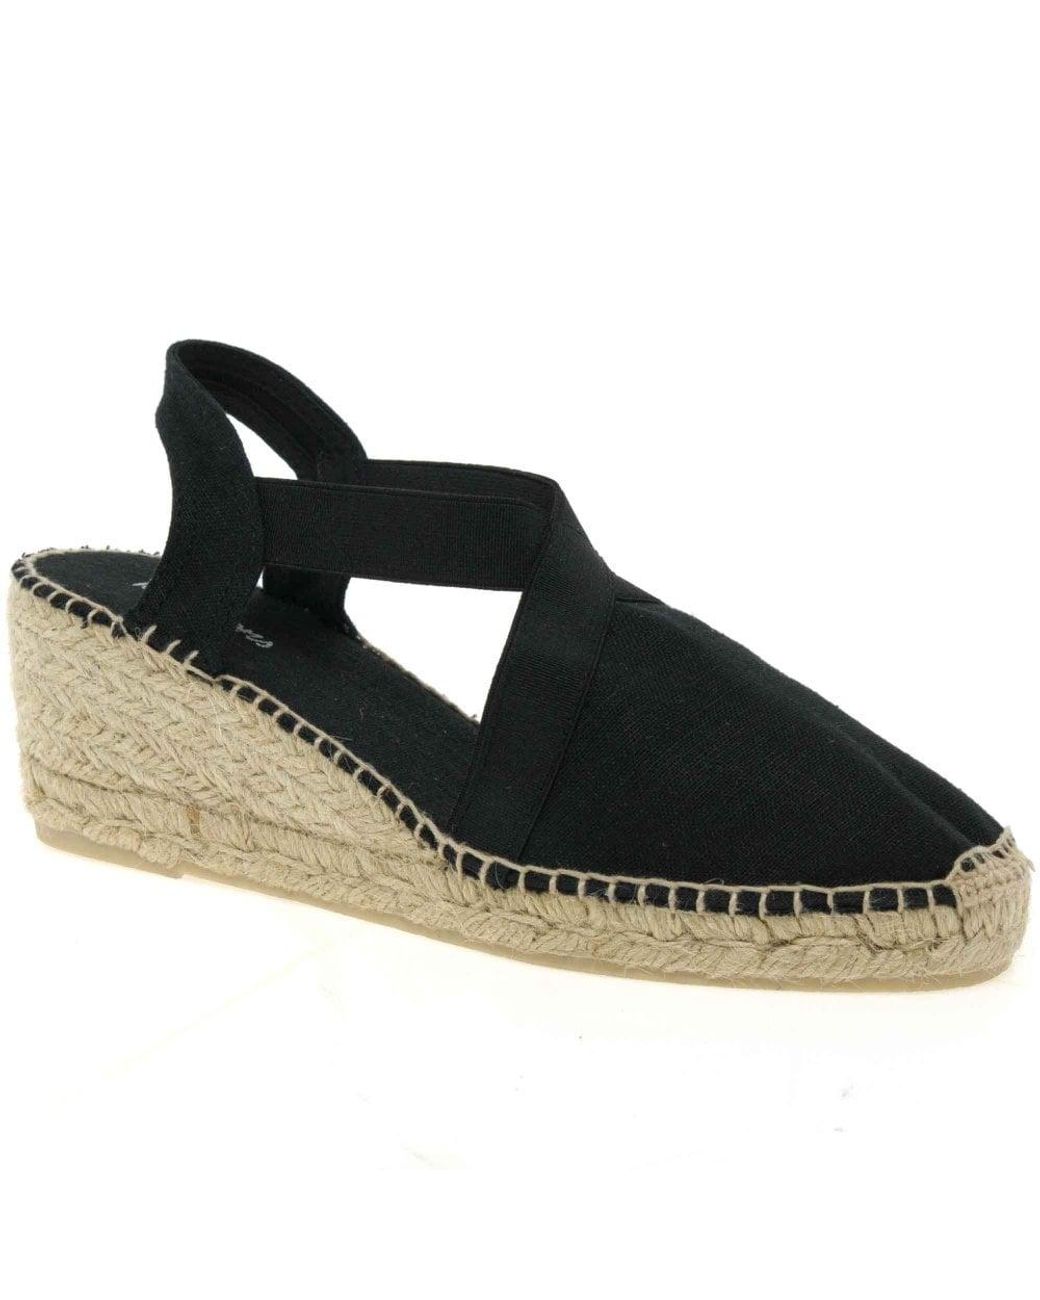 Toni Pons Rubber Ter Womens Wedge Heeled Espadrilles in Black - Lyst